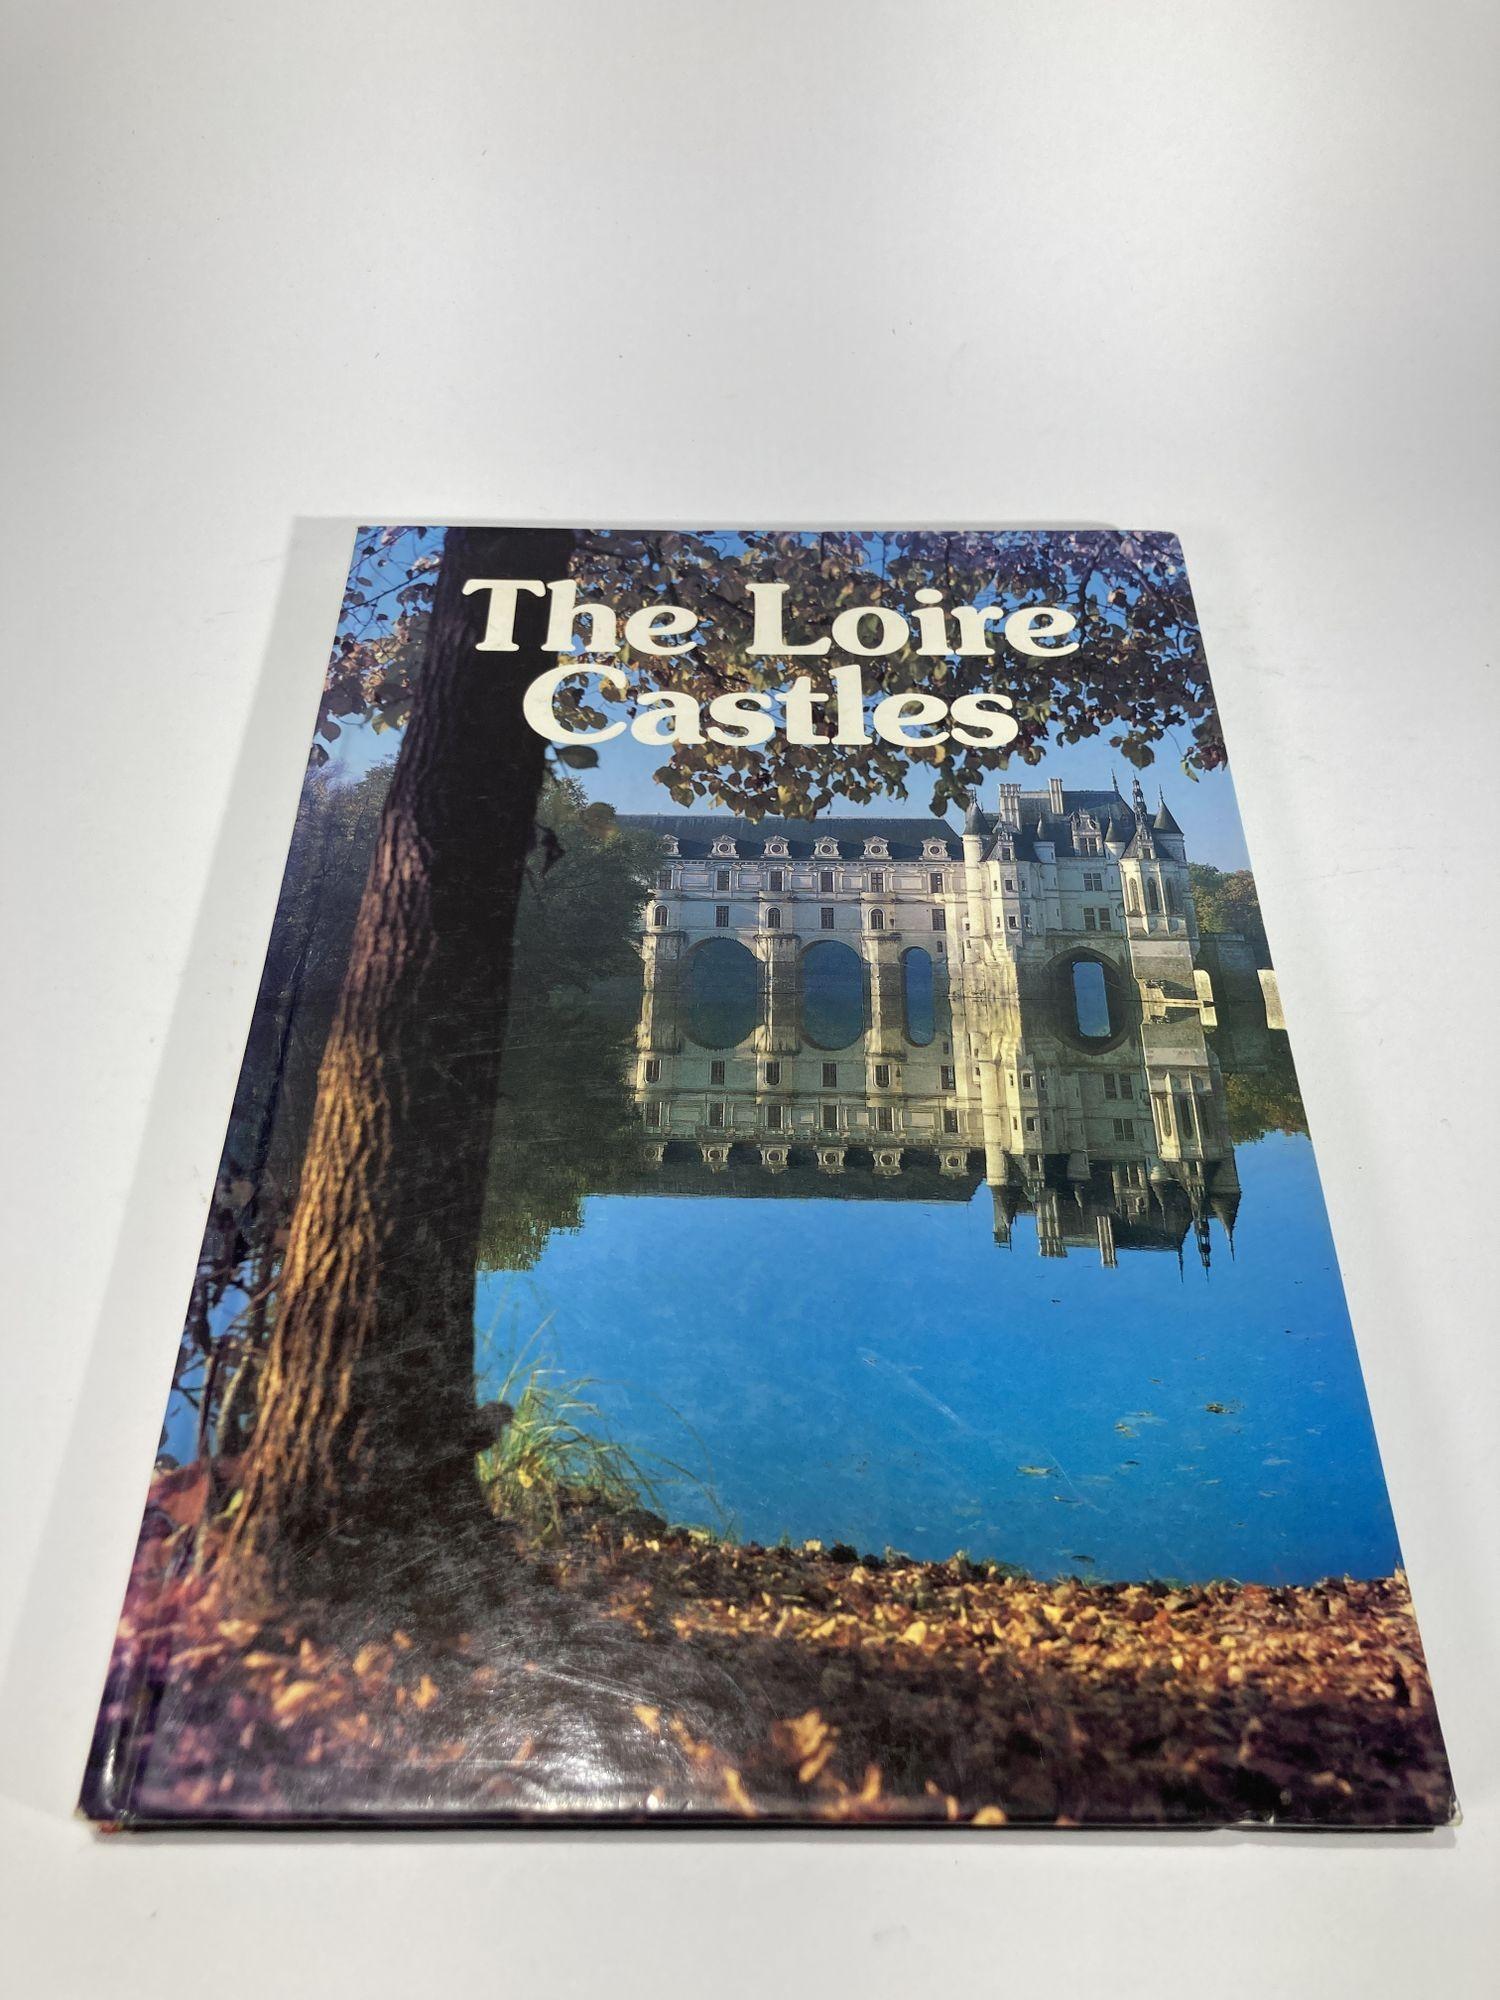 The Loire Castles Artaud Freres Publication Hardcover Book by Armel De Wismes.
Beautiful photographs in color of different castles, inside and out, on the Loire River.
Publisher : Artaud Freres Publications - Nantes 
Circa 1985
Language :